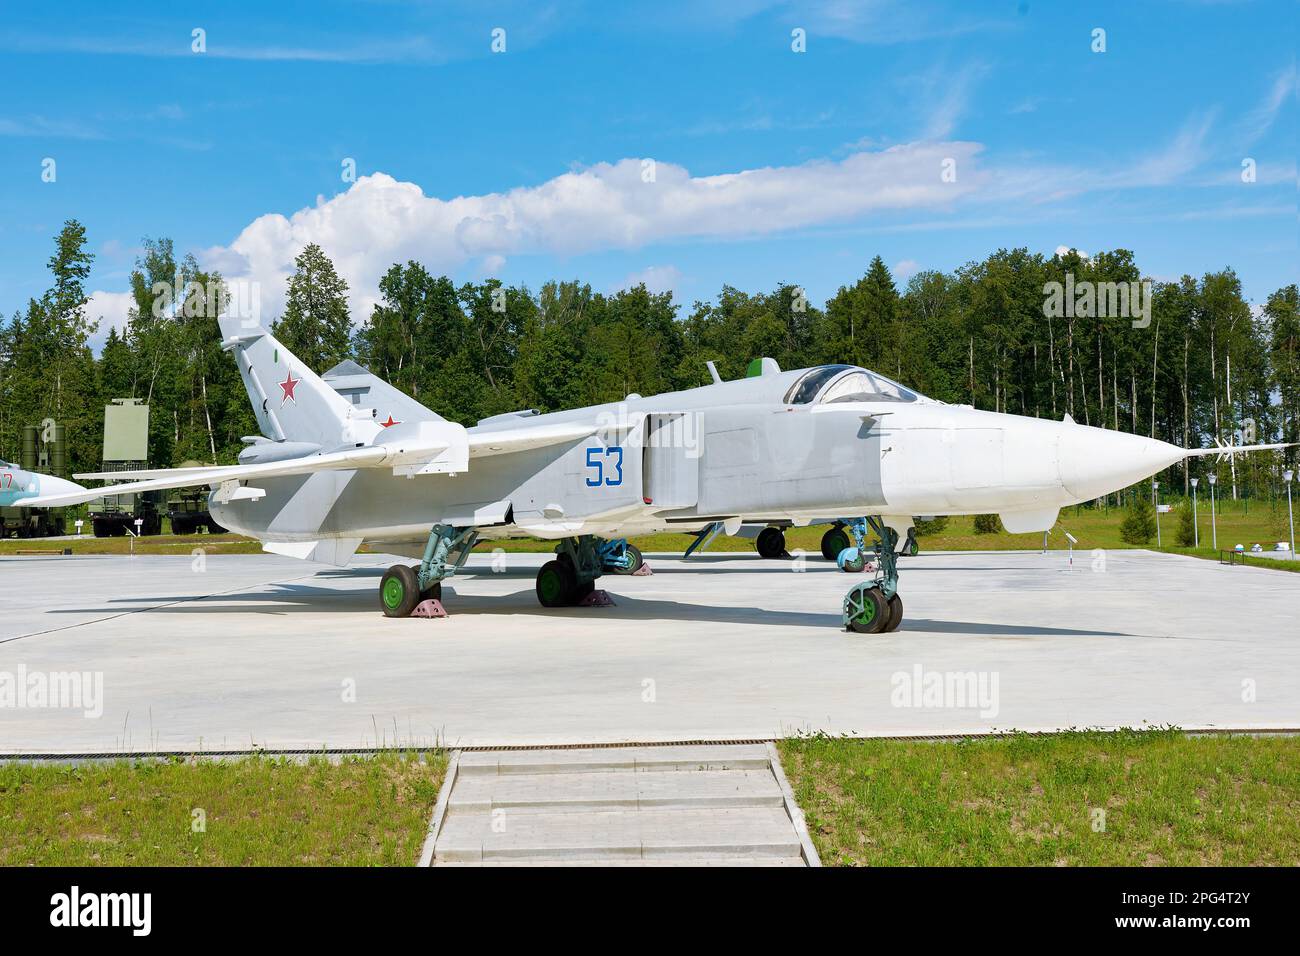 PARK PATRIOT, KUBINKA, MOSCOW REGION, RUSSIA - July 11, 2017: Sukhoi Su-24 supersonic, all-weather attack aircraft Stock Photo